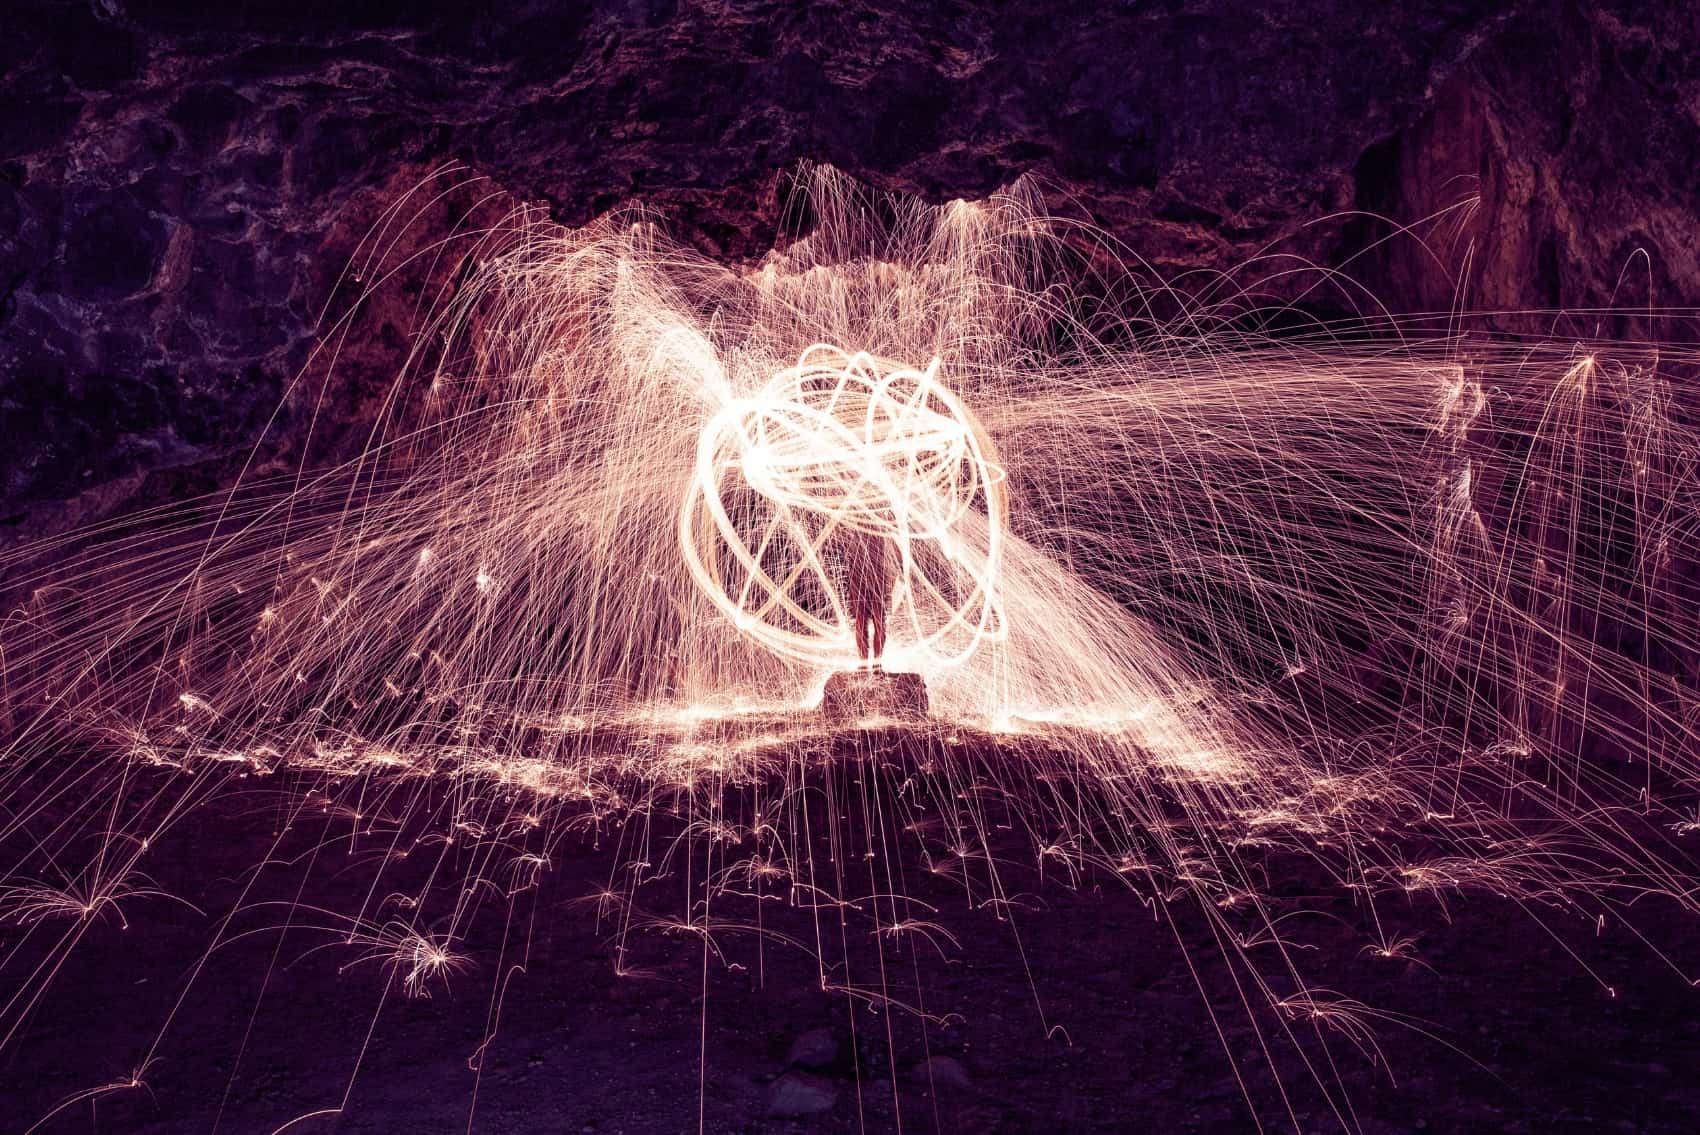 Sparklers glowing purple in a cave